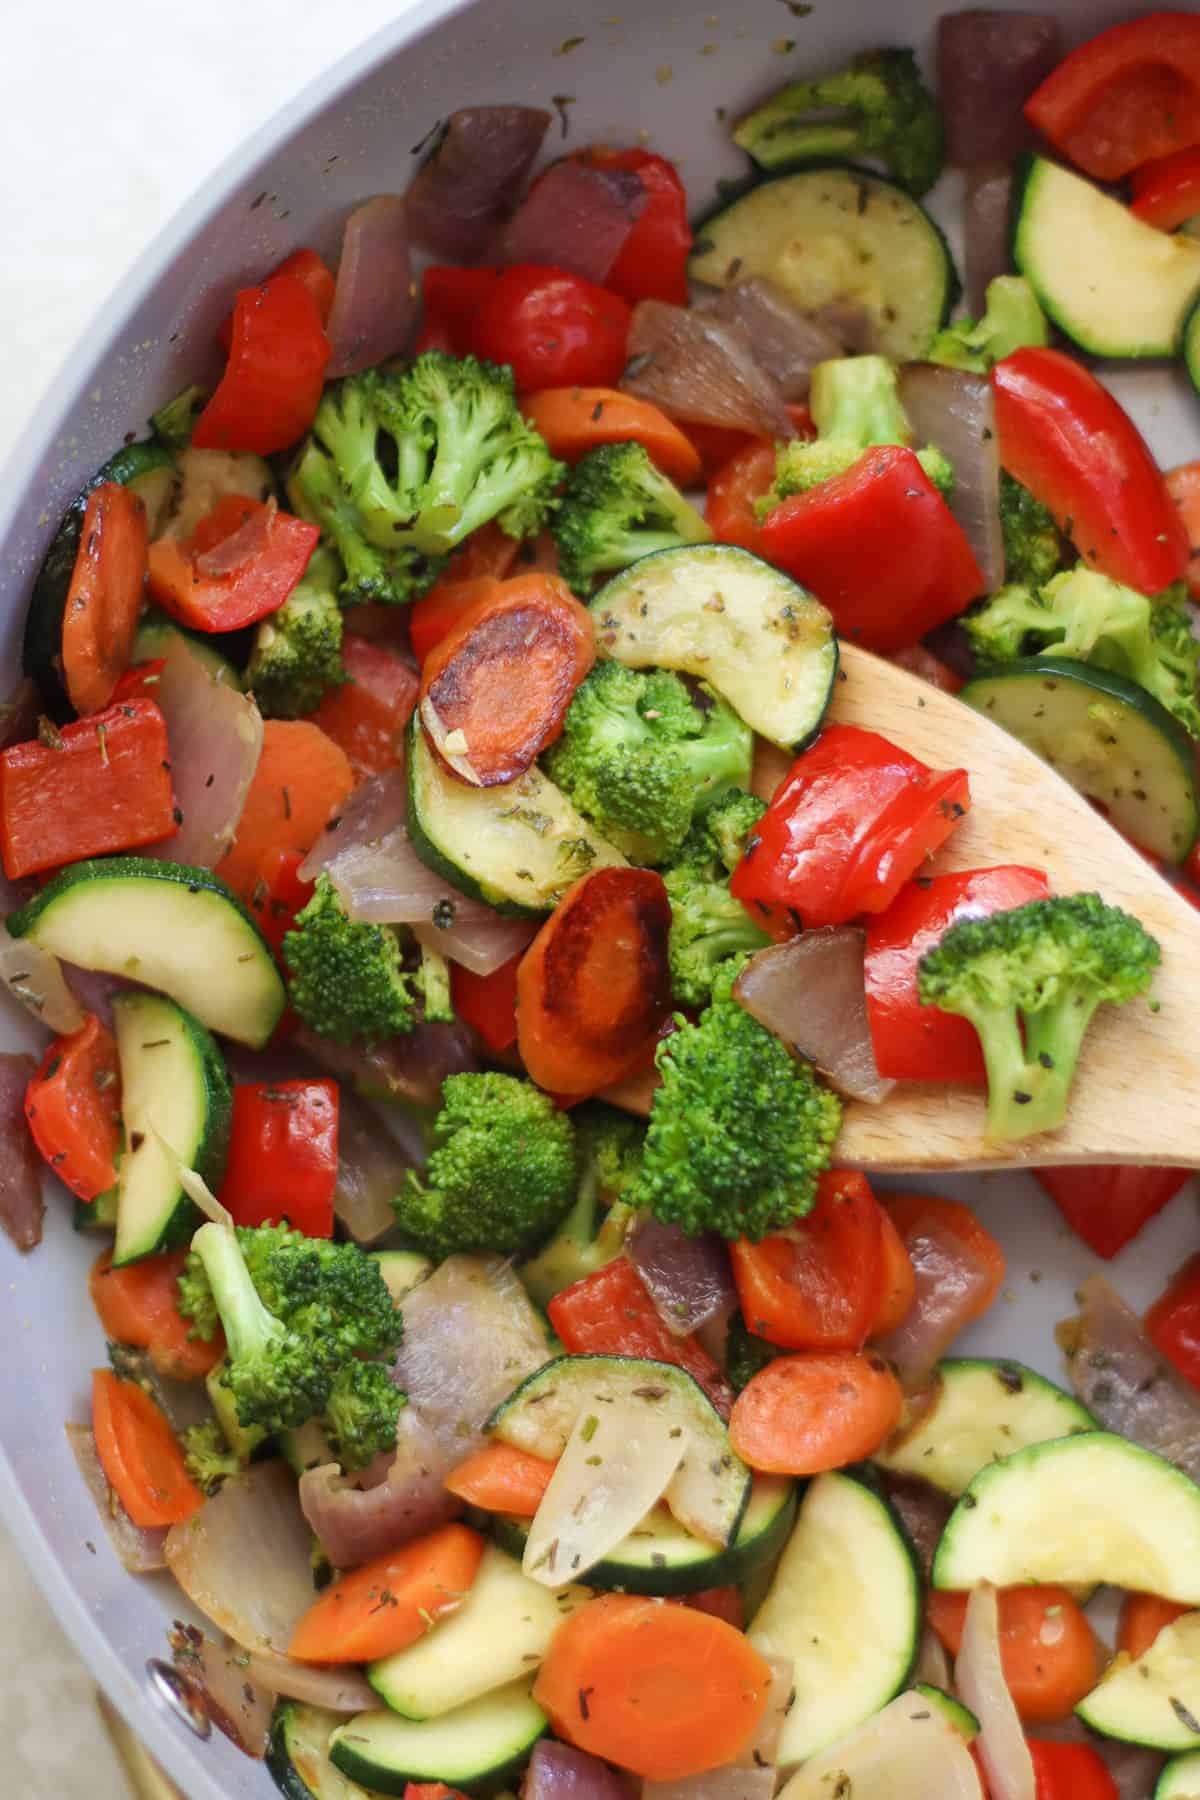 Colorful vegetables scooped with a wooden spoon.